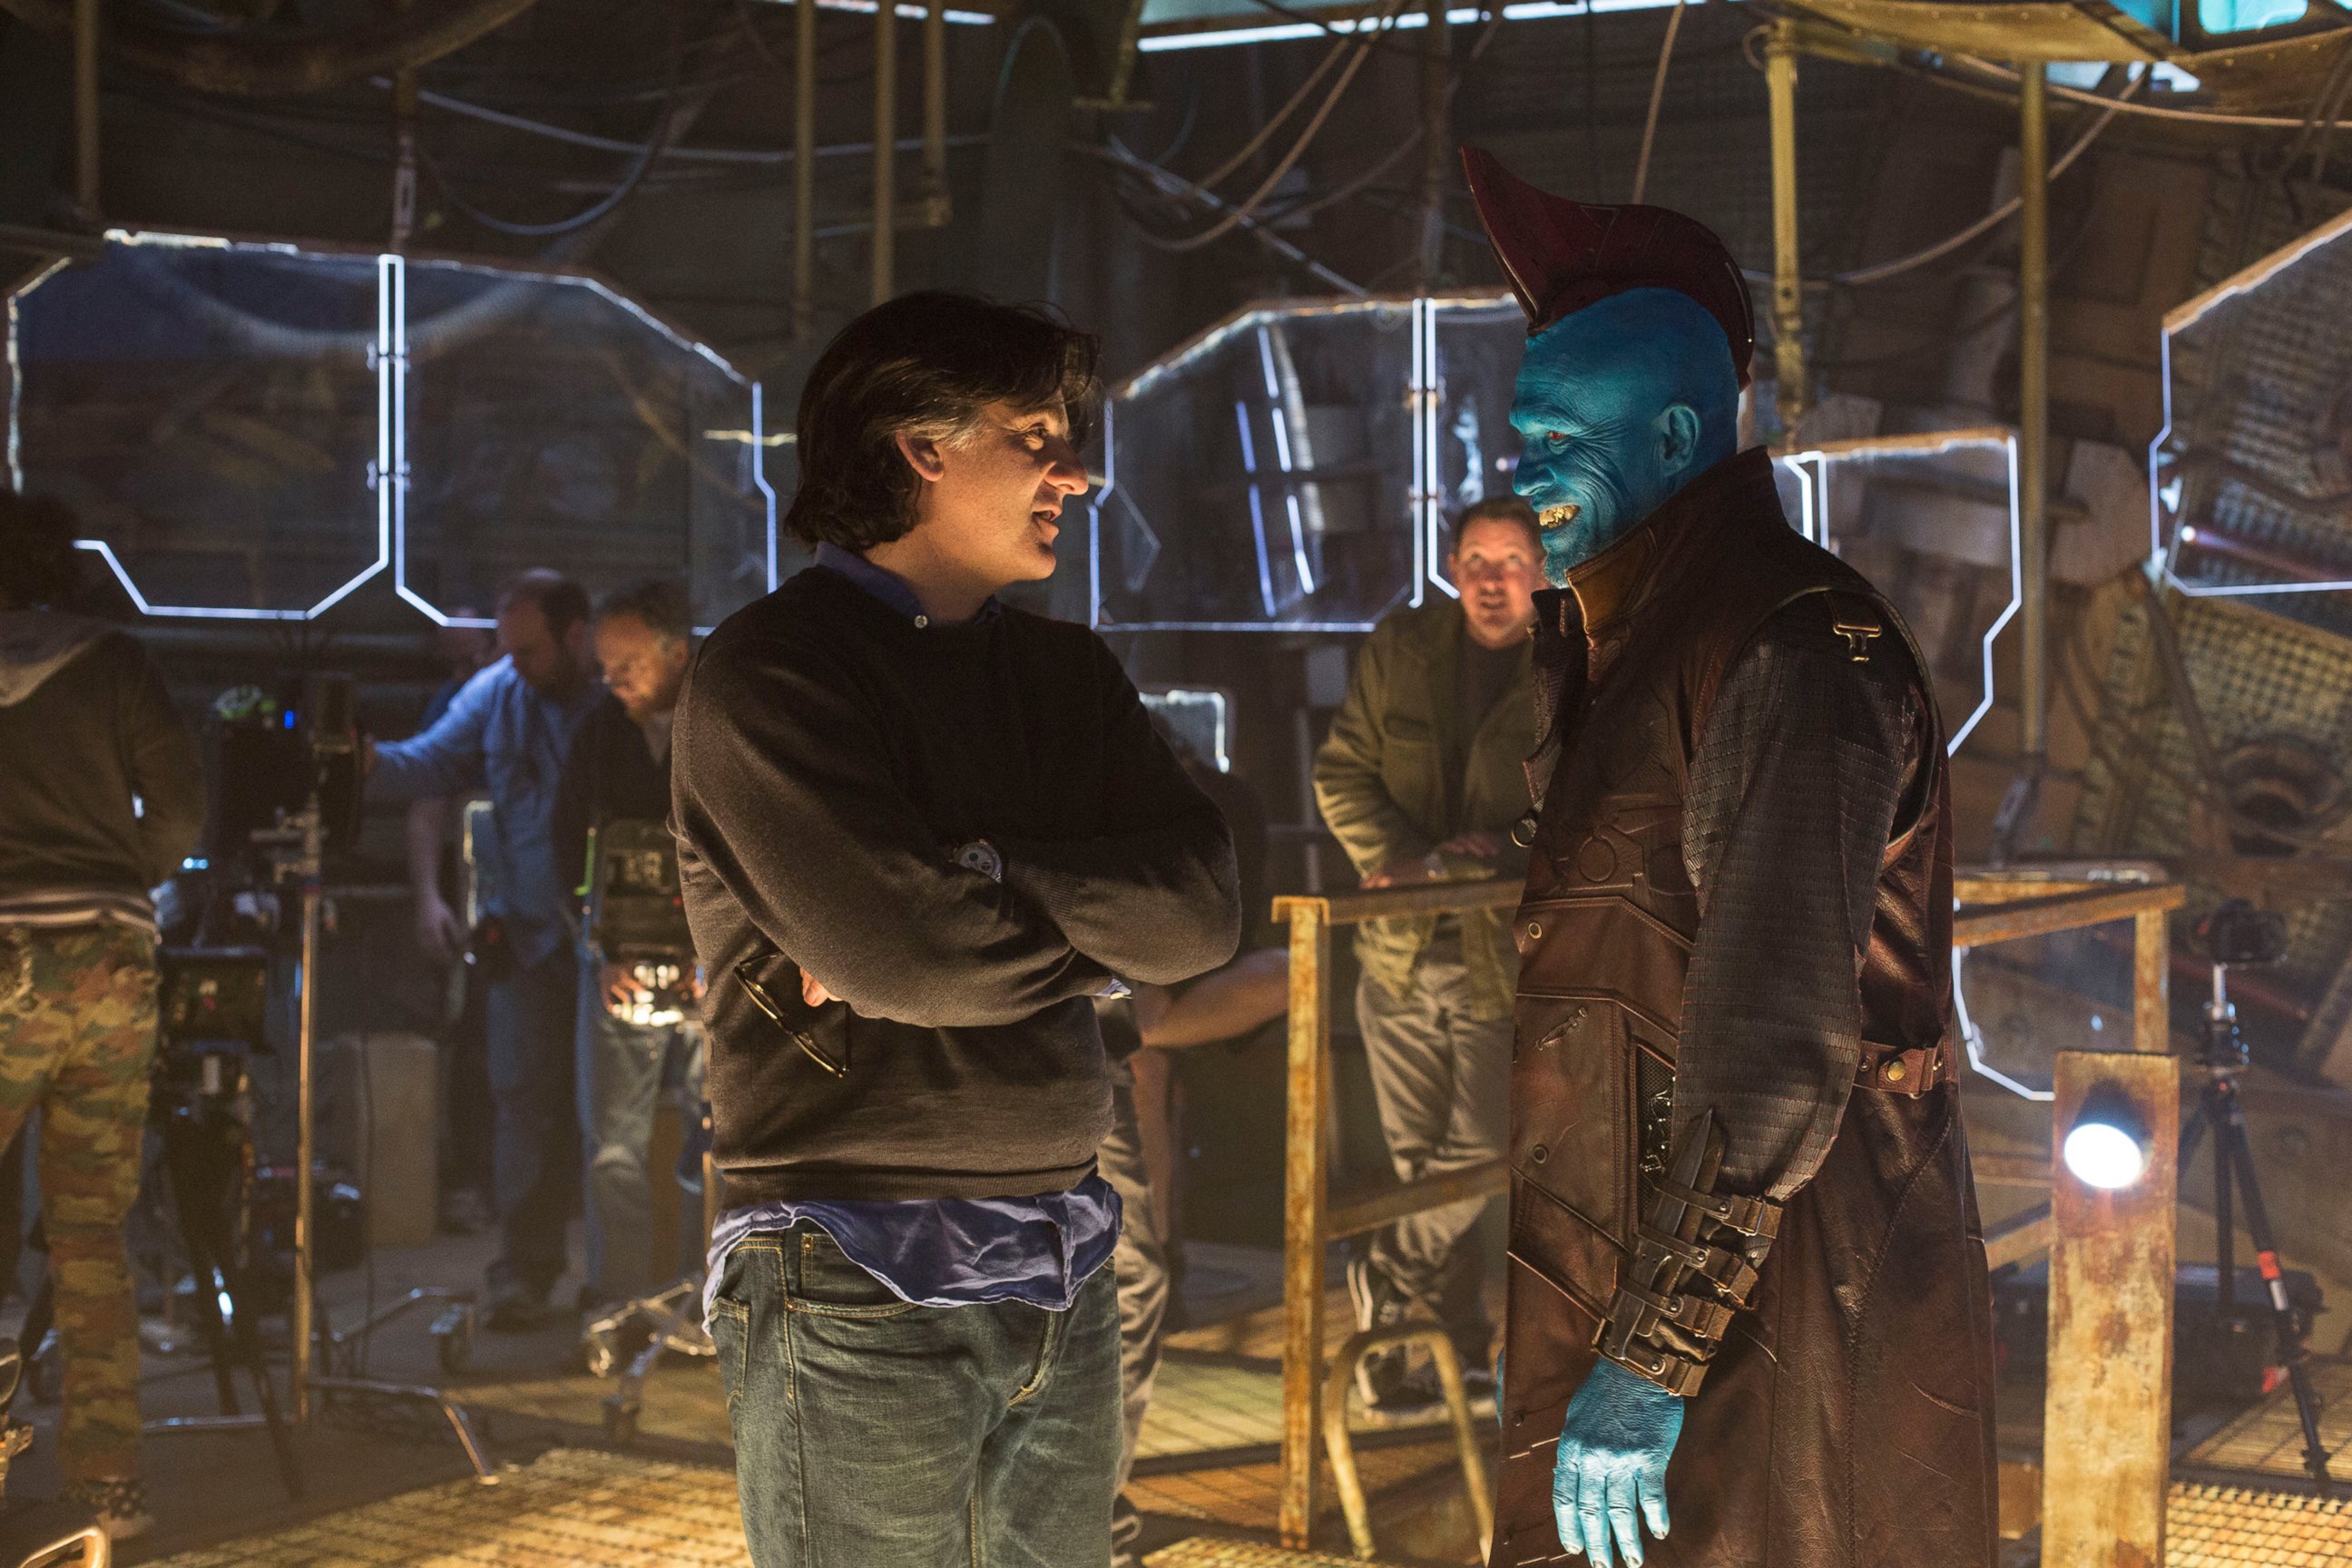 PHOTO: Actor Michael Rooker and Director of Photography Henry Braham are pictured on the set of "Guardians of the Galaxy Vol. 2."